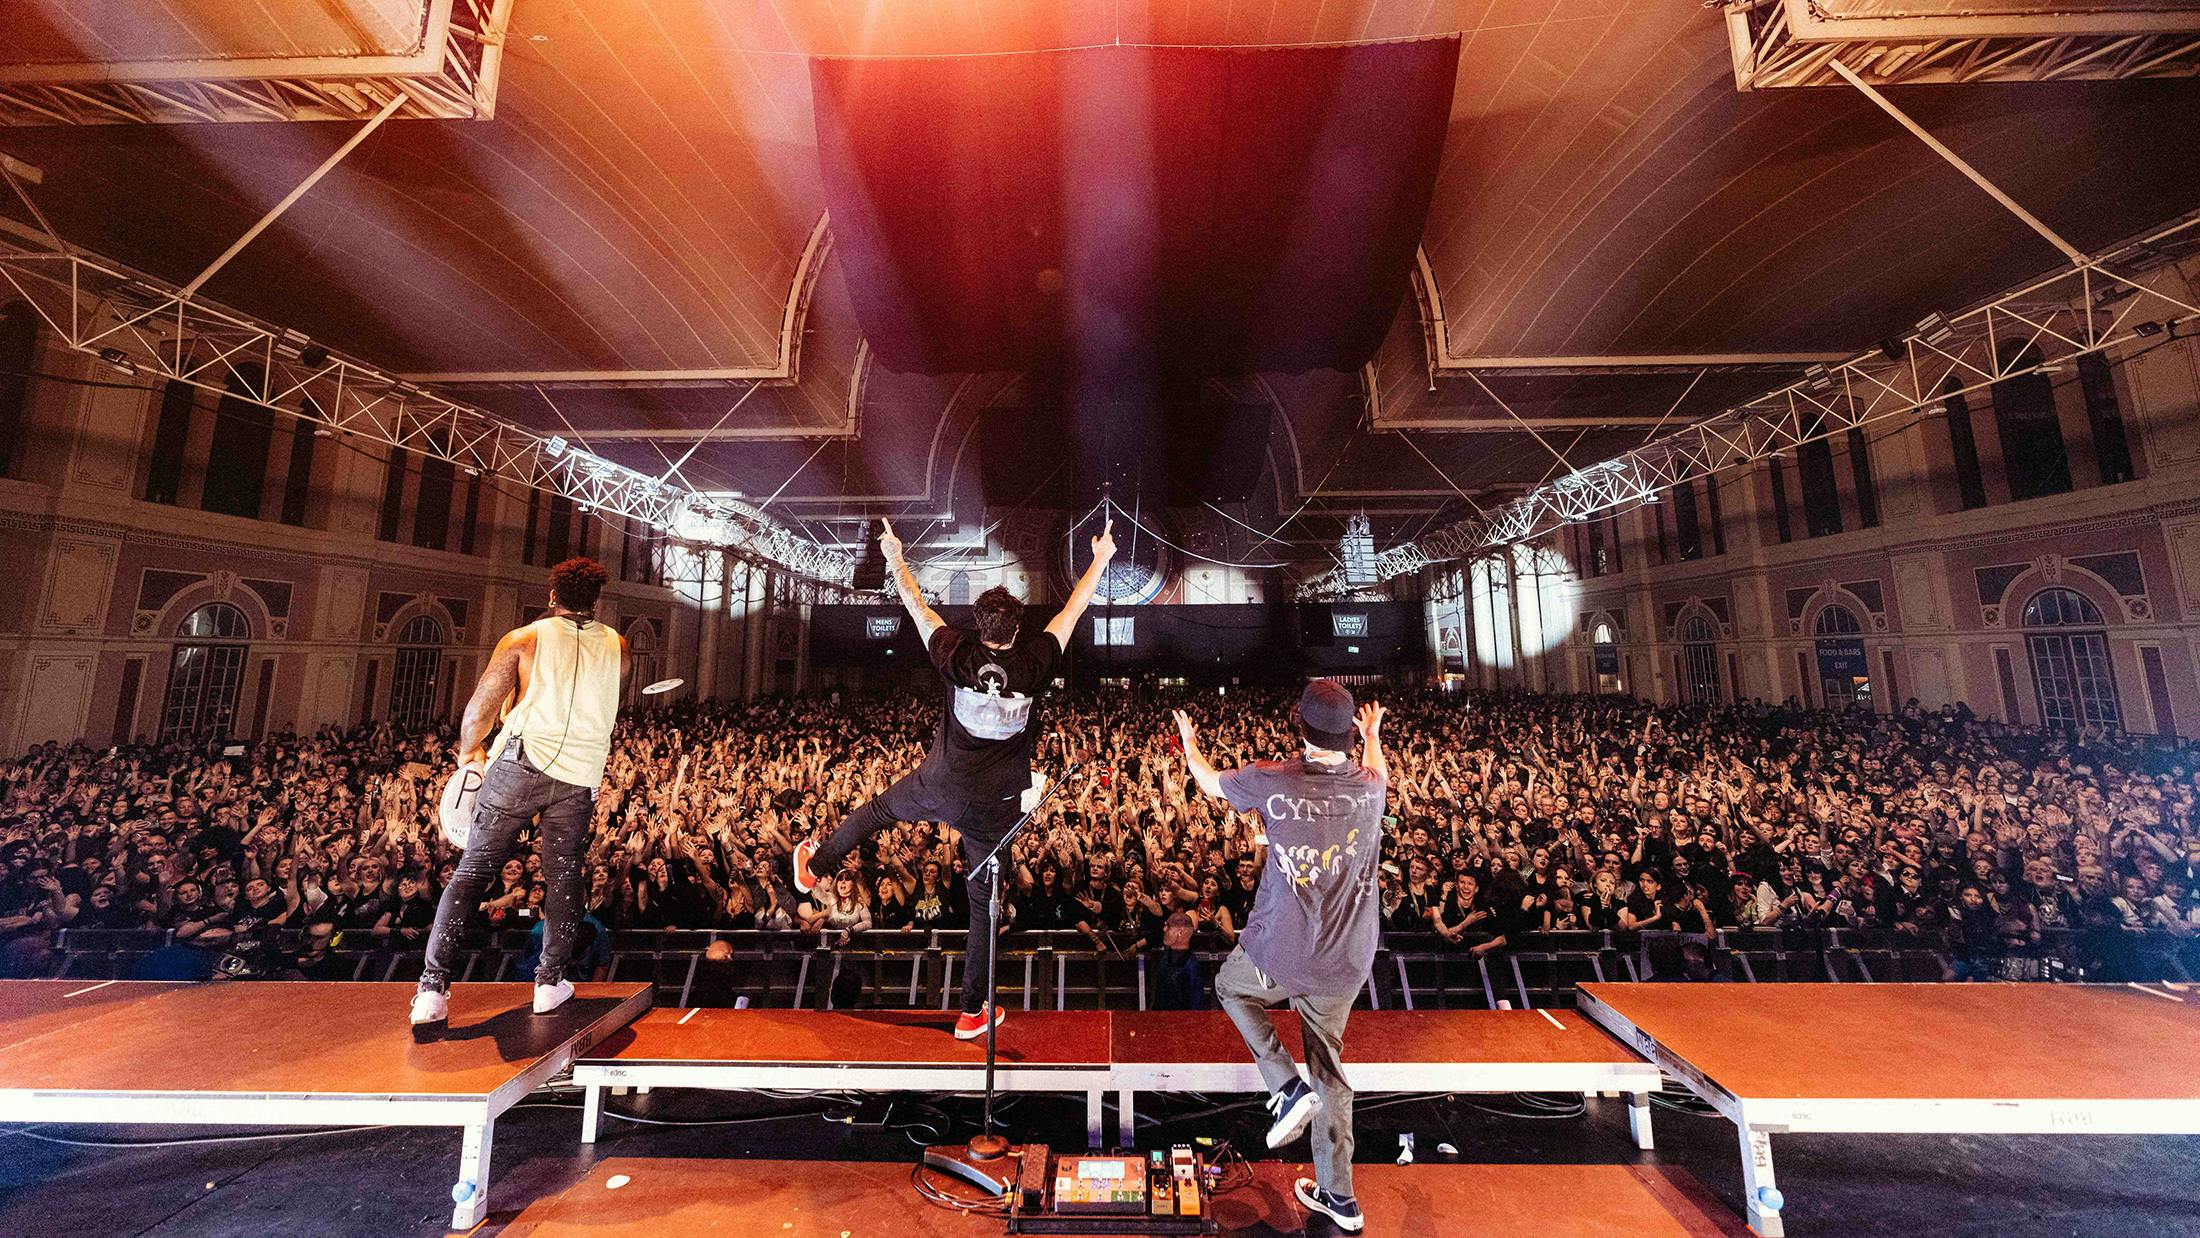 In pictures: Pierce The Veil’s monumental headline show at London’s Alexandra Palace